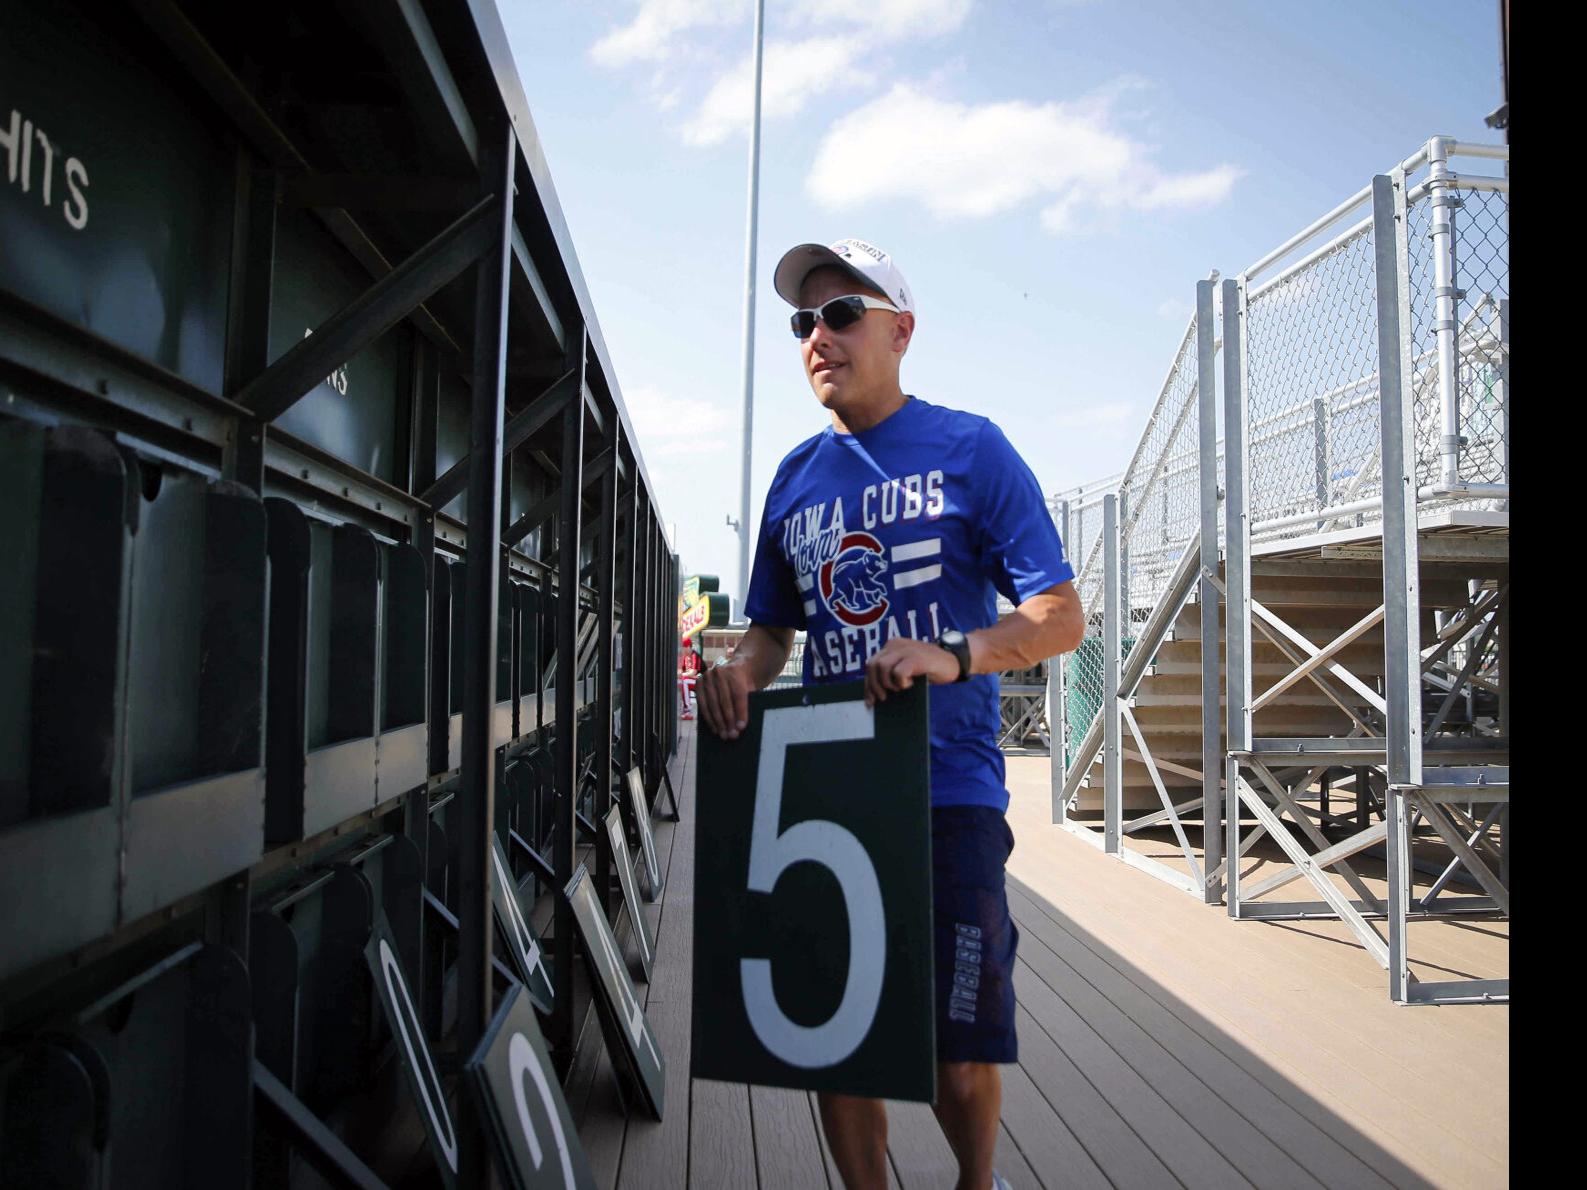 Batting practice and sunglasses at Cubs spring training